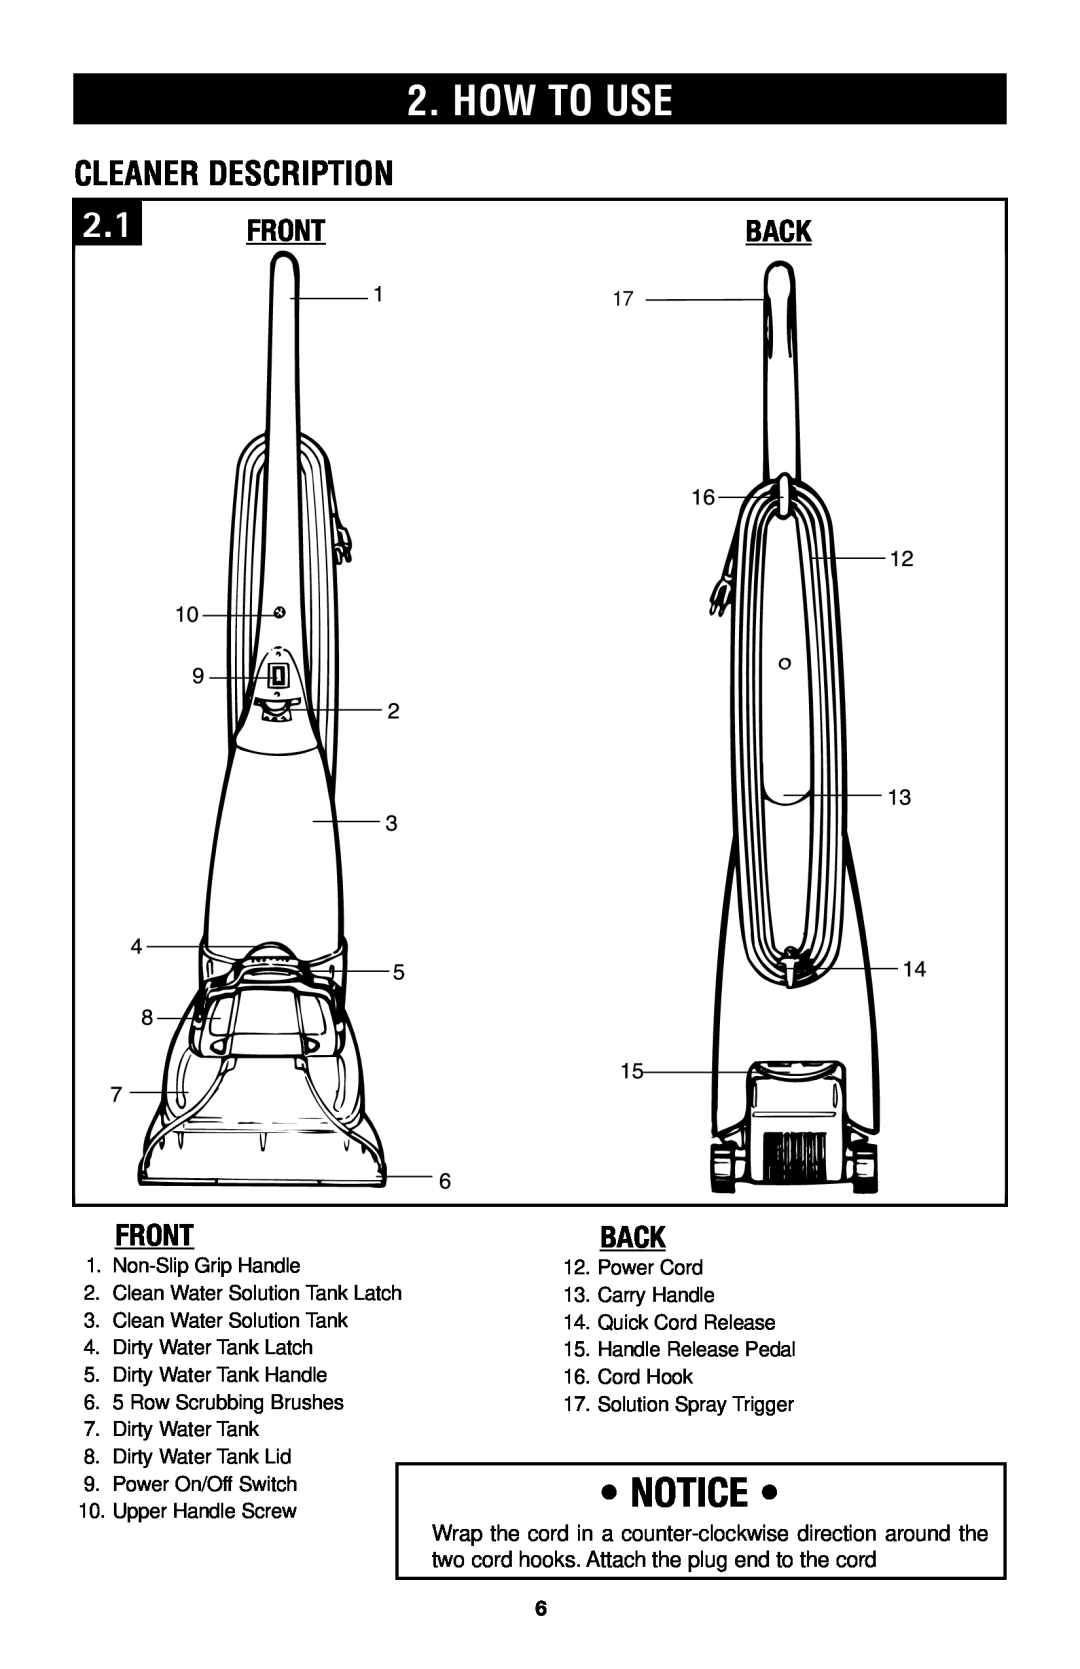 Hoover E1 owner manual How To Use, Cleaner Description, Front, Back 